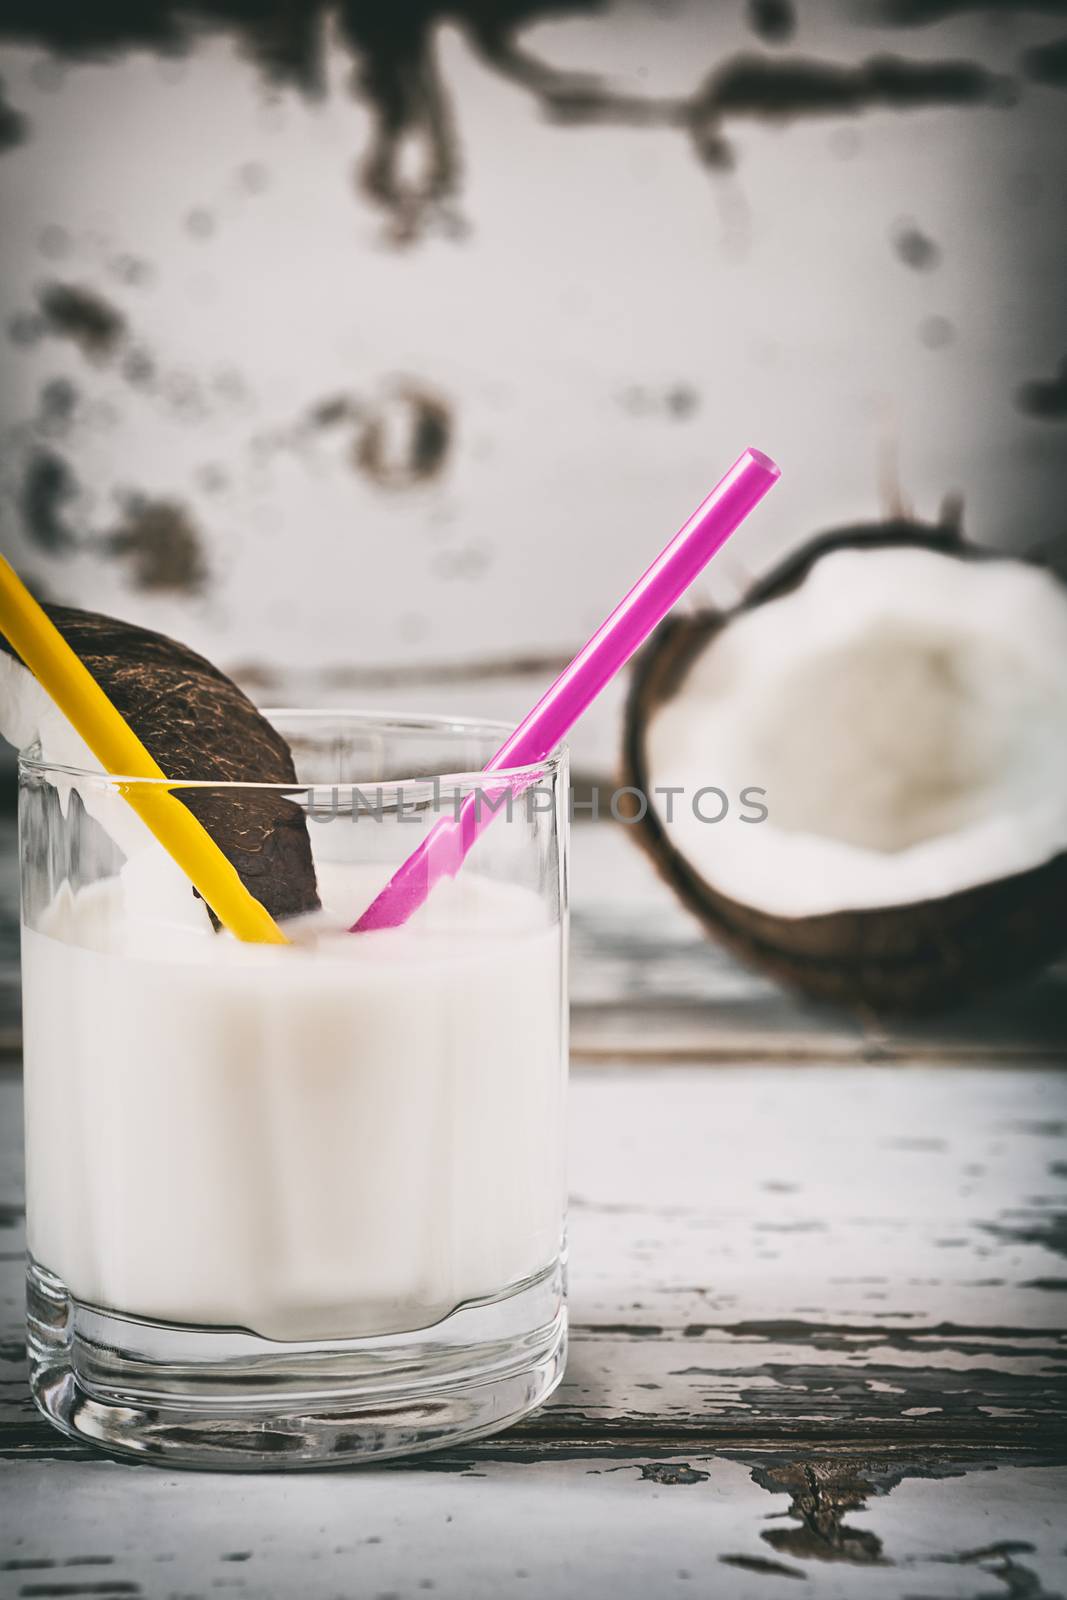 Closeup of coconut milk on a glass over a wooden background